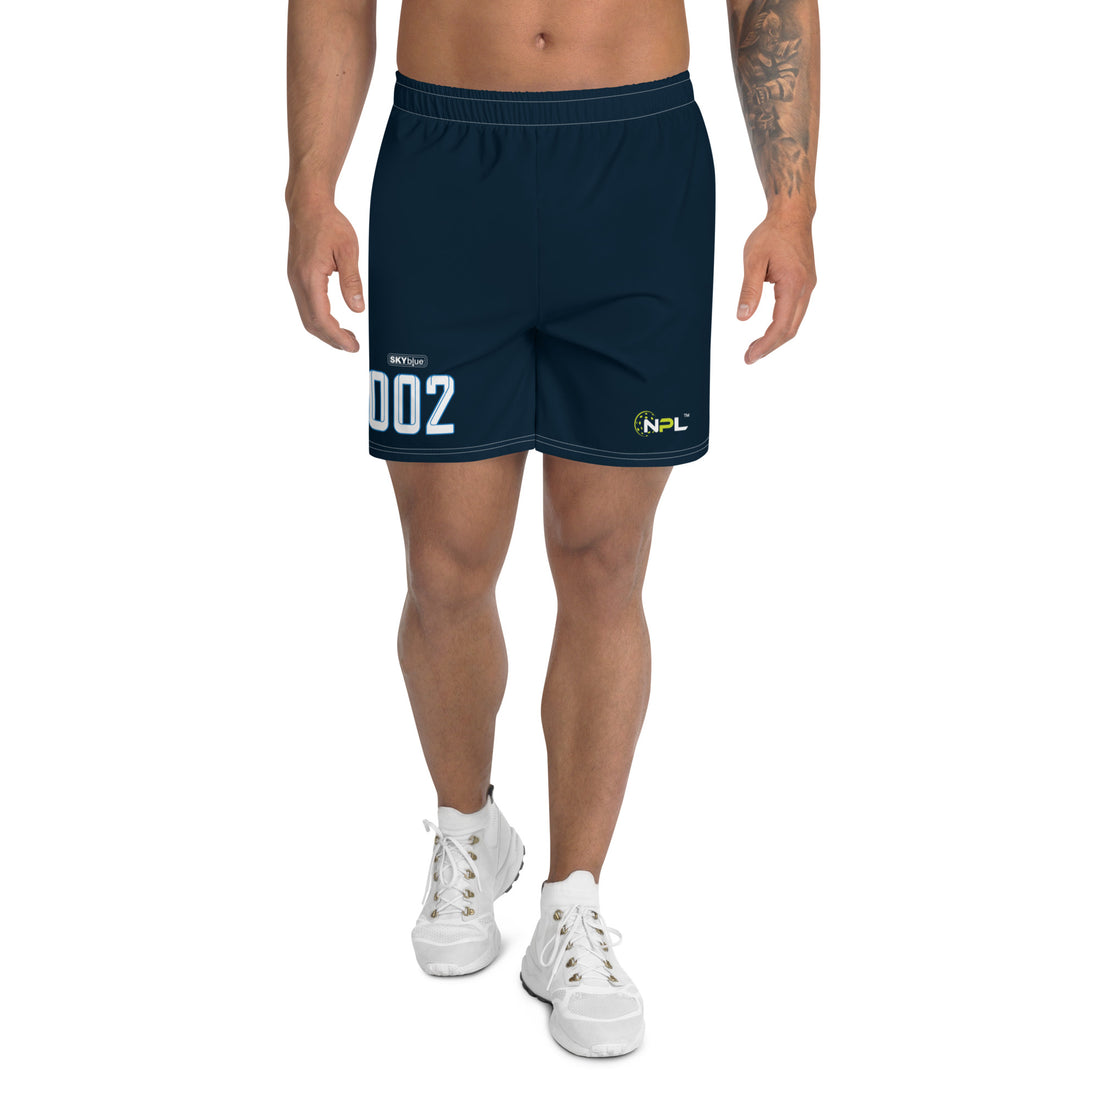 Rich Lively 002 Boca Raton Picklers™ SKYblue™ 2023 Authentic Shorts for Men - Dark Blue